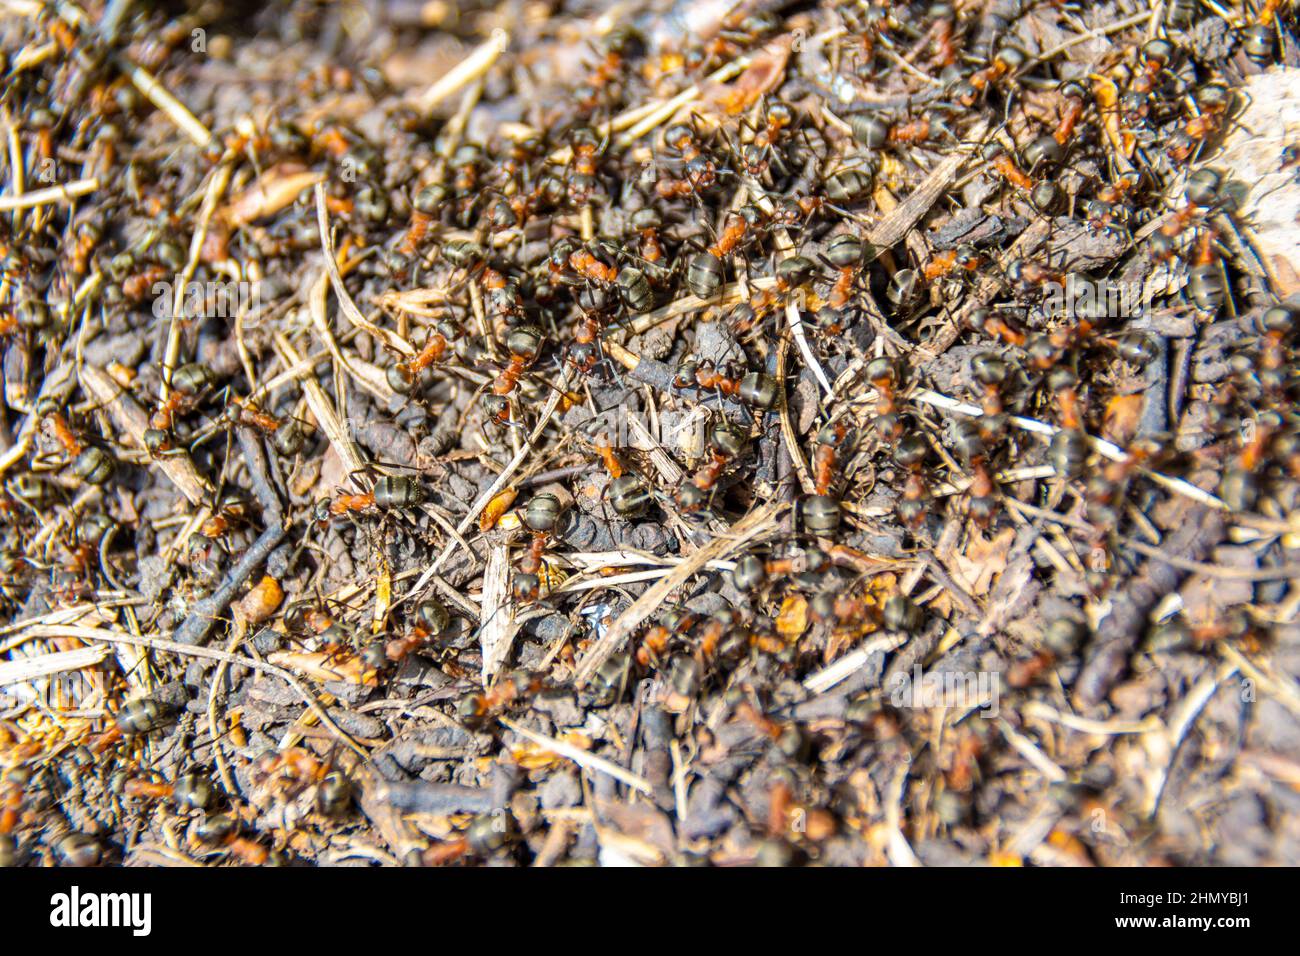 a nest of wood ants on the surface of which worker ants run in large numbers, selective focus Stock Photo